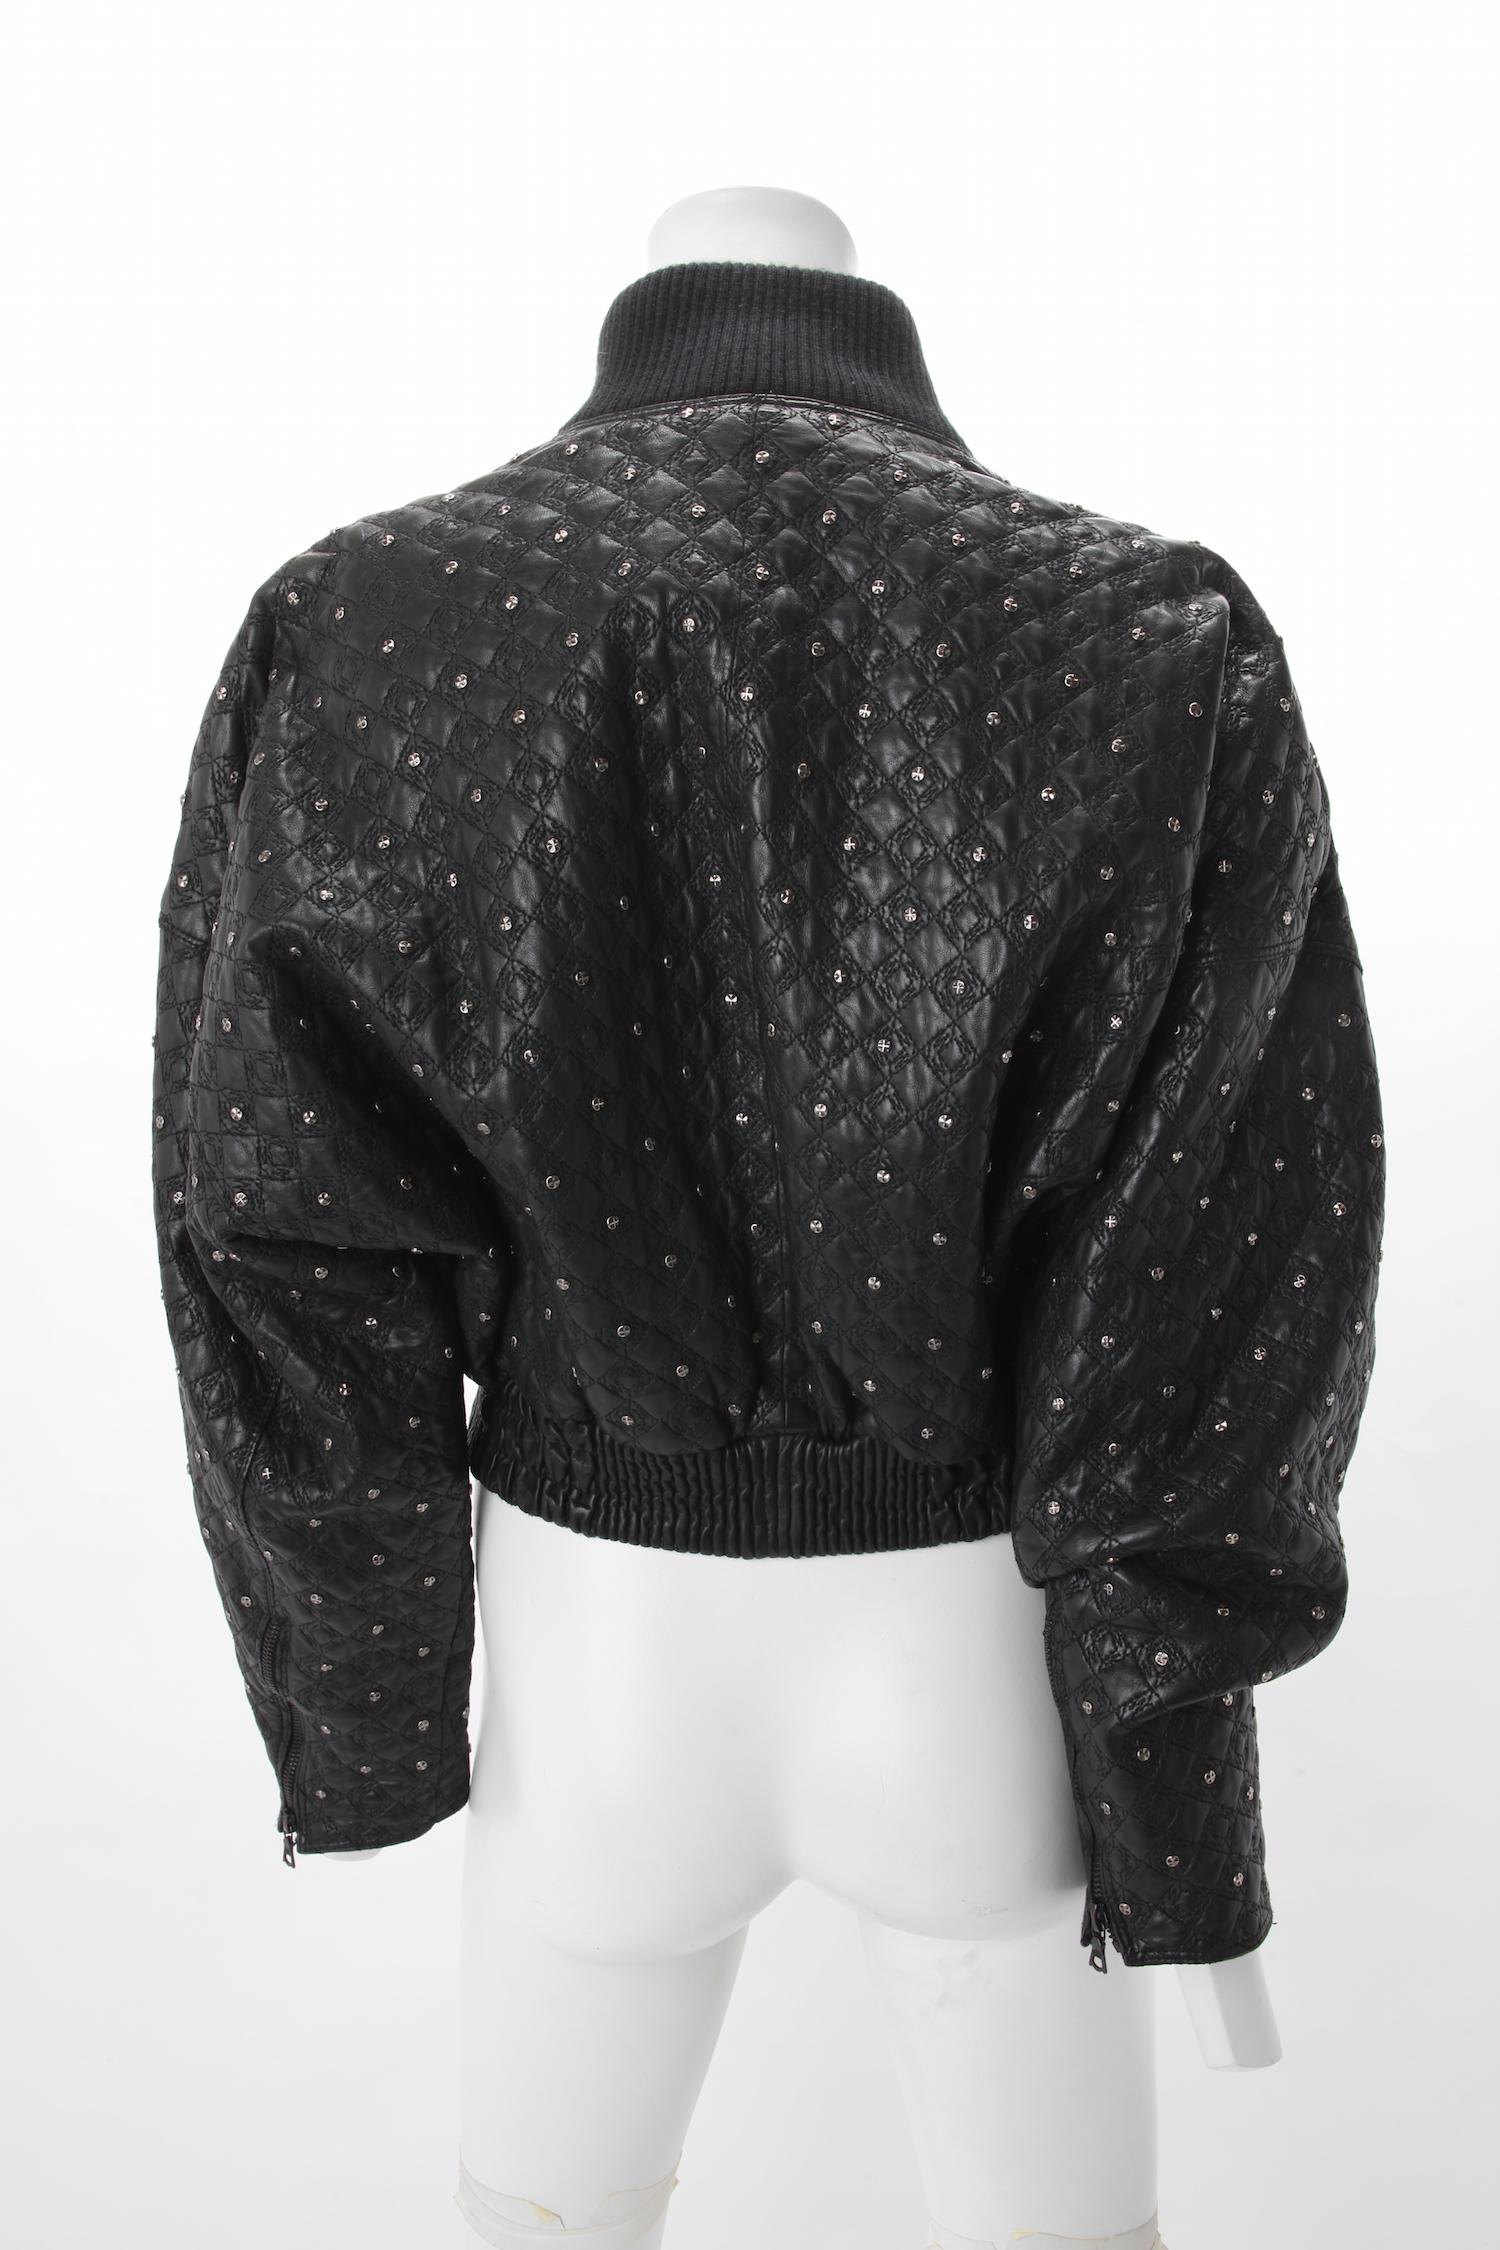 Gianni Versace Black Quilted Leather Bomber Jacket with studs, c.1990s. In Good Condition In New York, NY